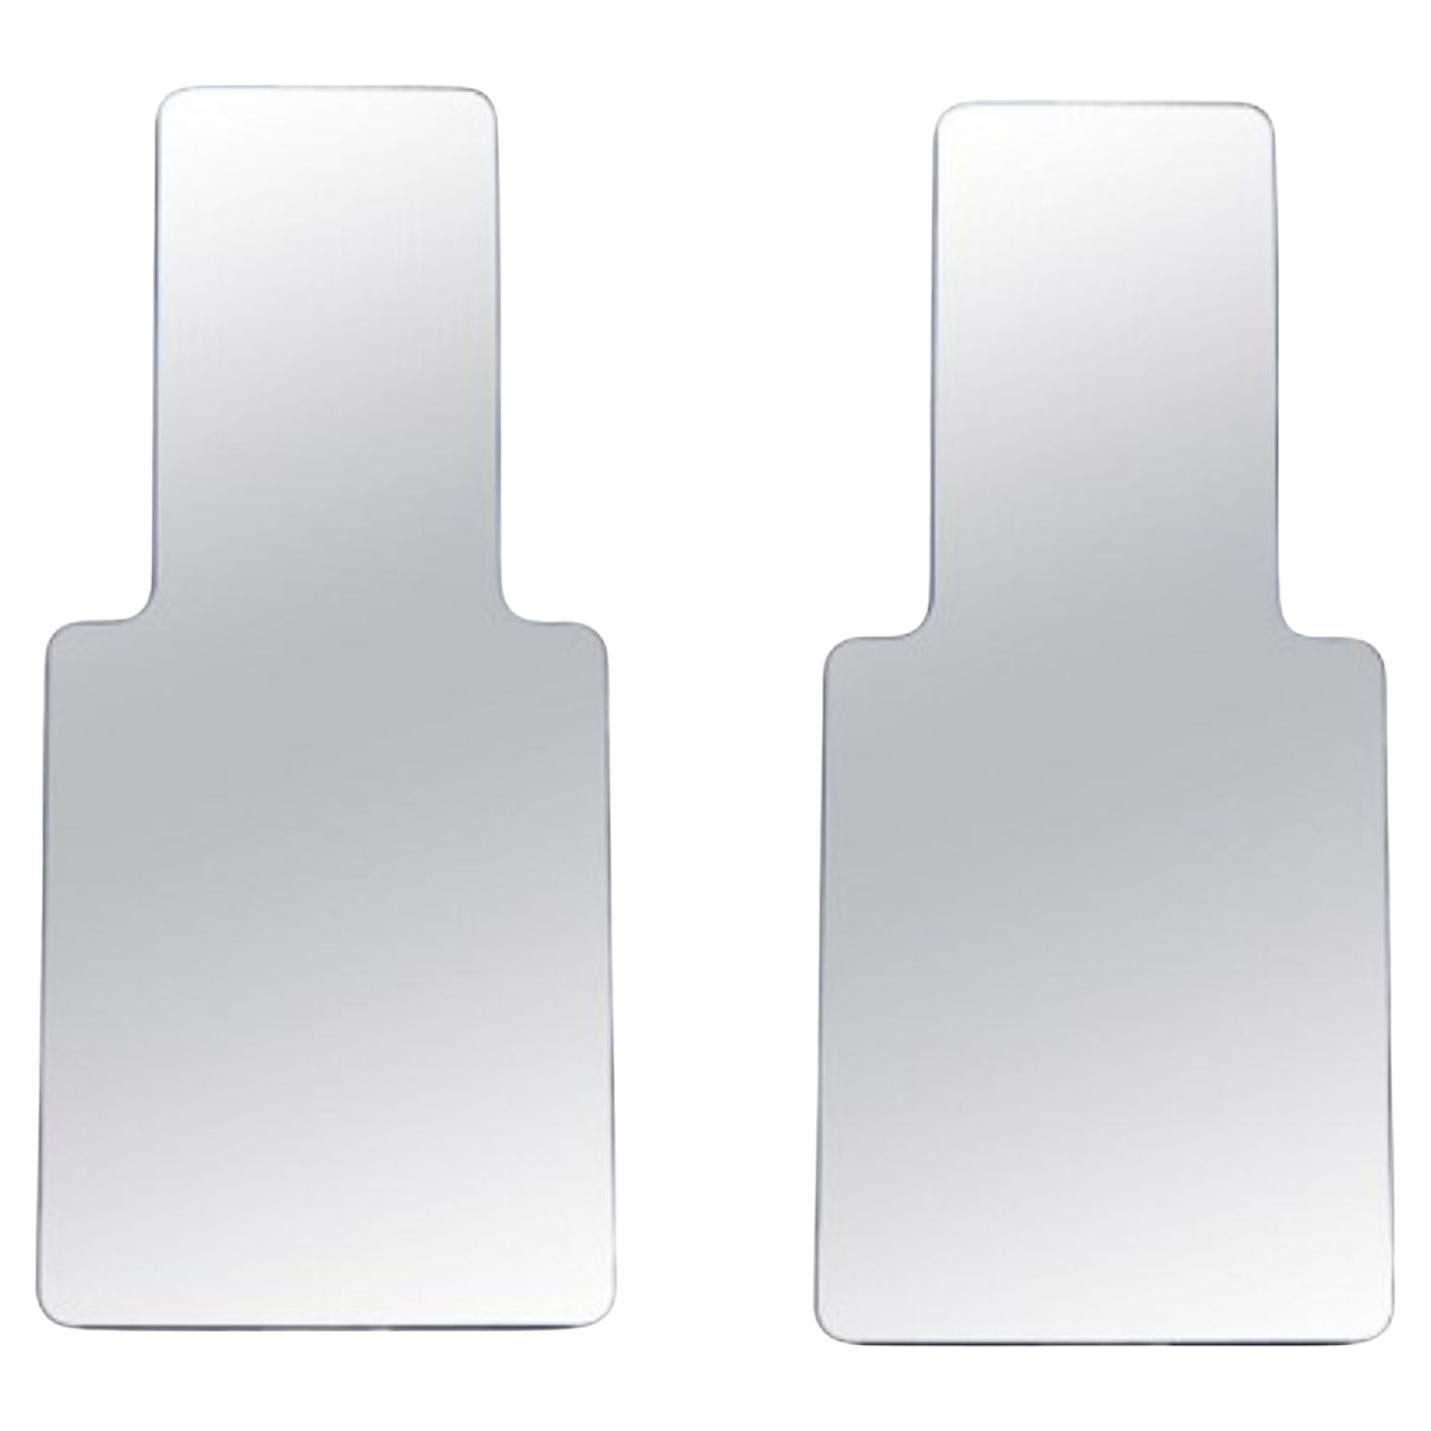 Set of 2 Loveself 03 Mirrors by Oito For Sale